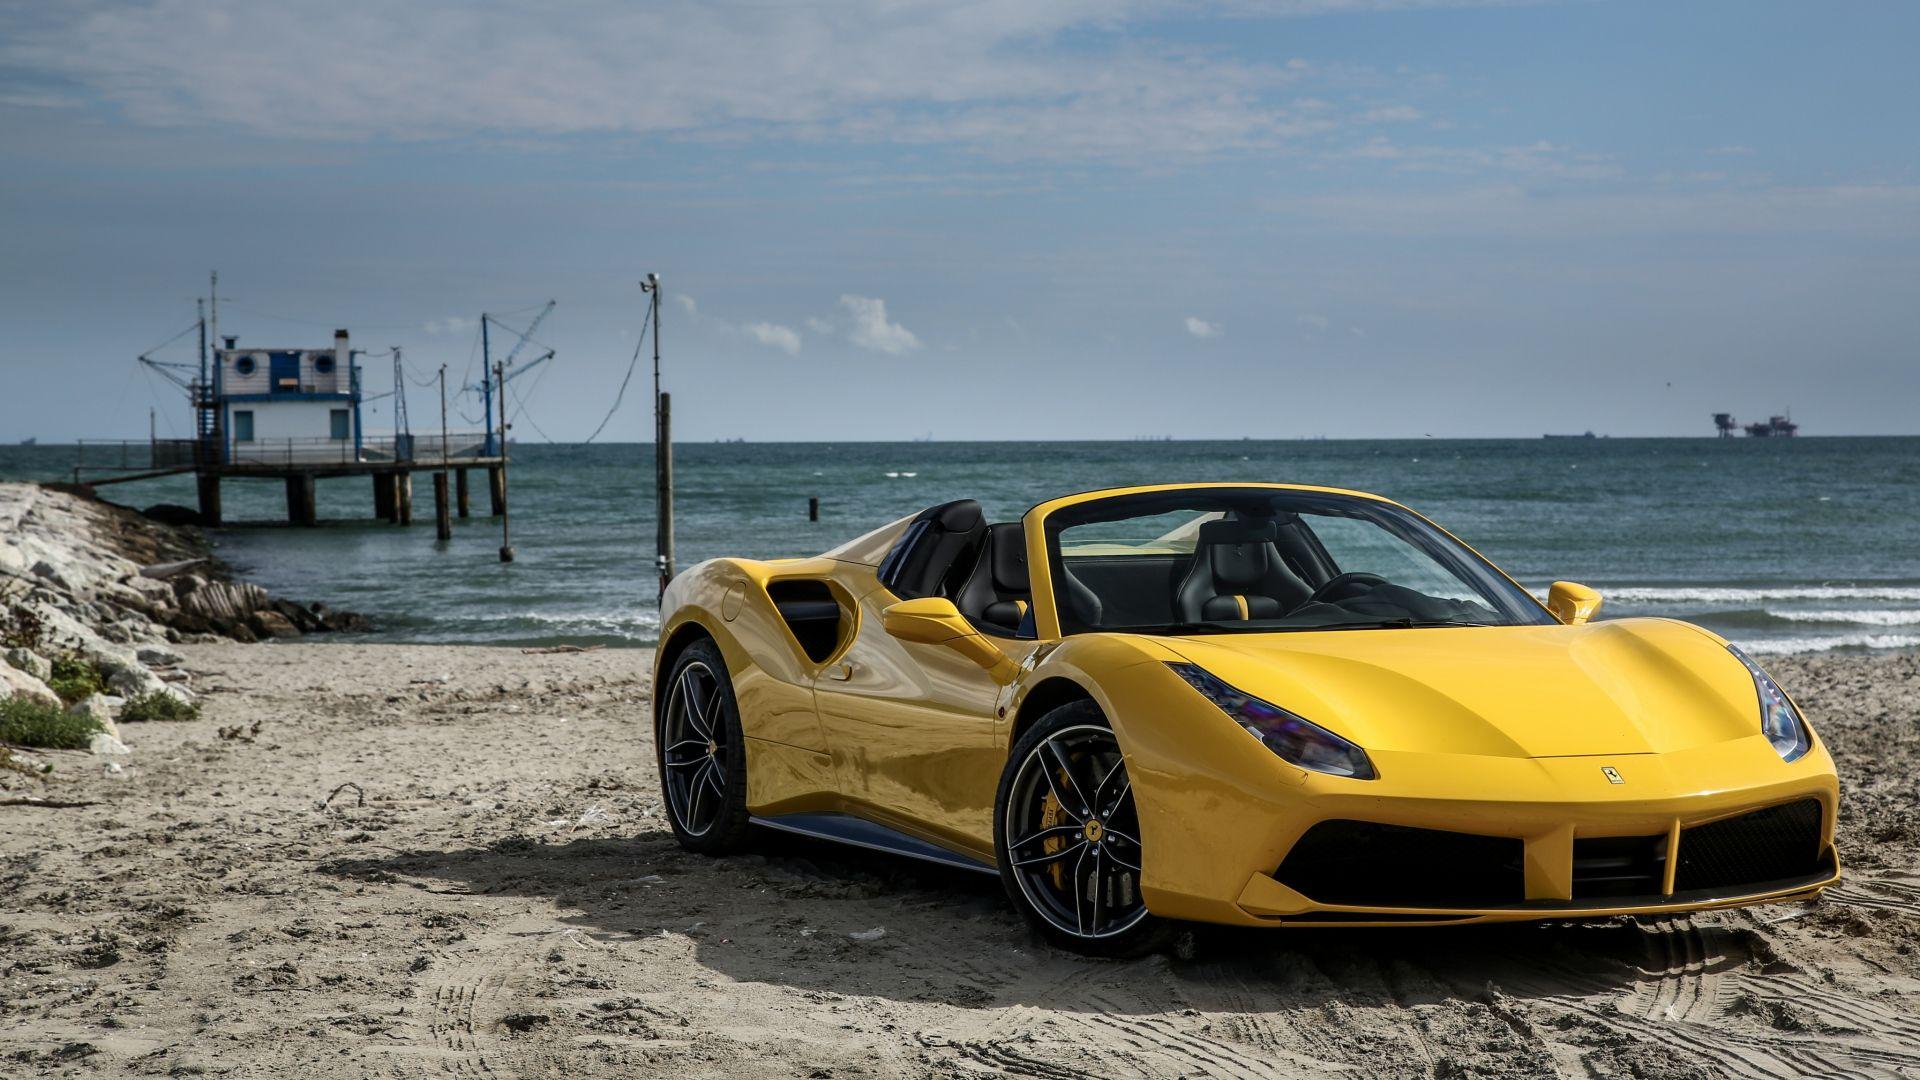 Beach Cars Wallpapers - Top Free Beach Cars Backgrounds - WallpaperAccess